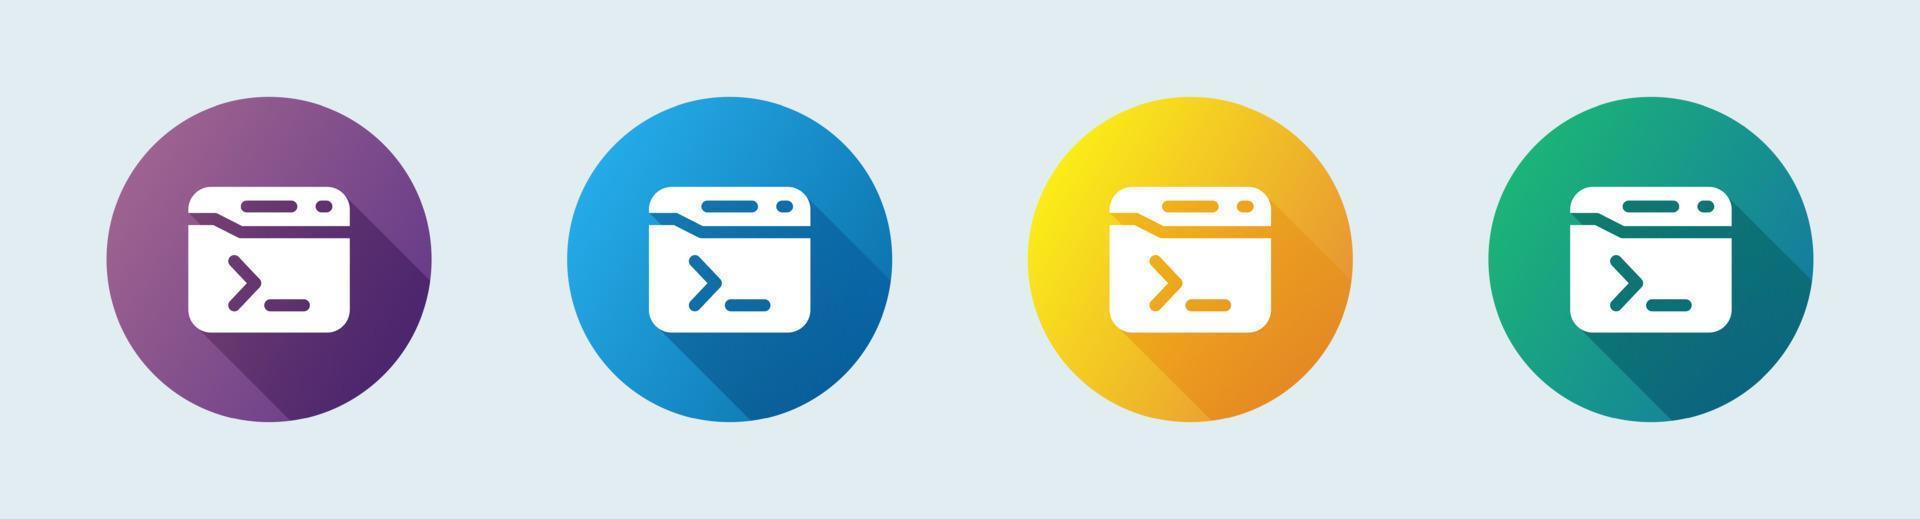 Terminal solid icon in flat design style. Code signs vector illustration.